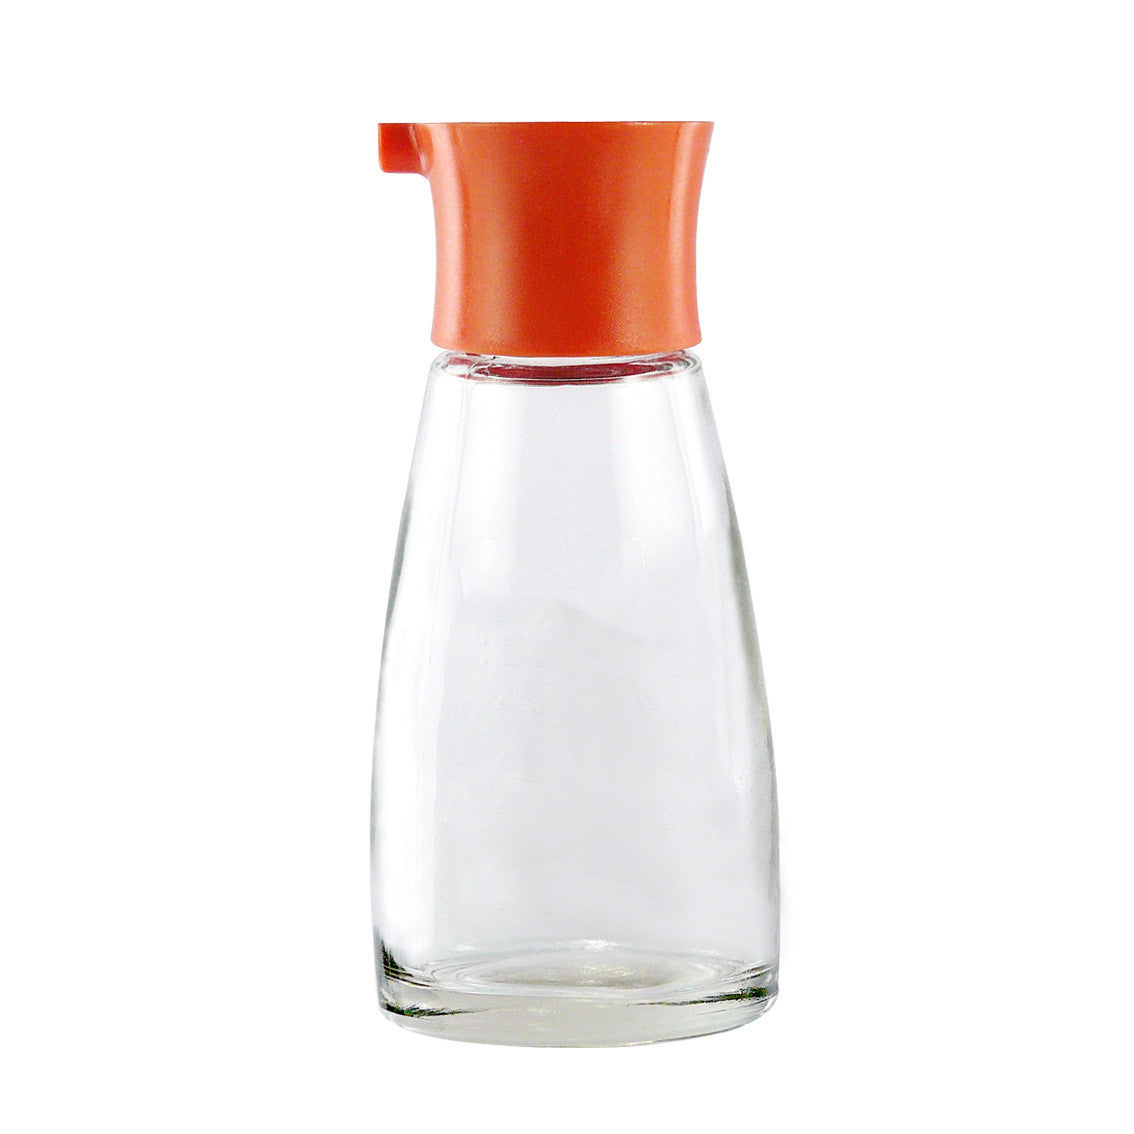 Creative Home Kitchen Glass Soy Sauce Bottle